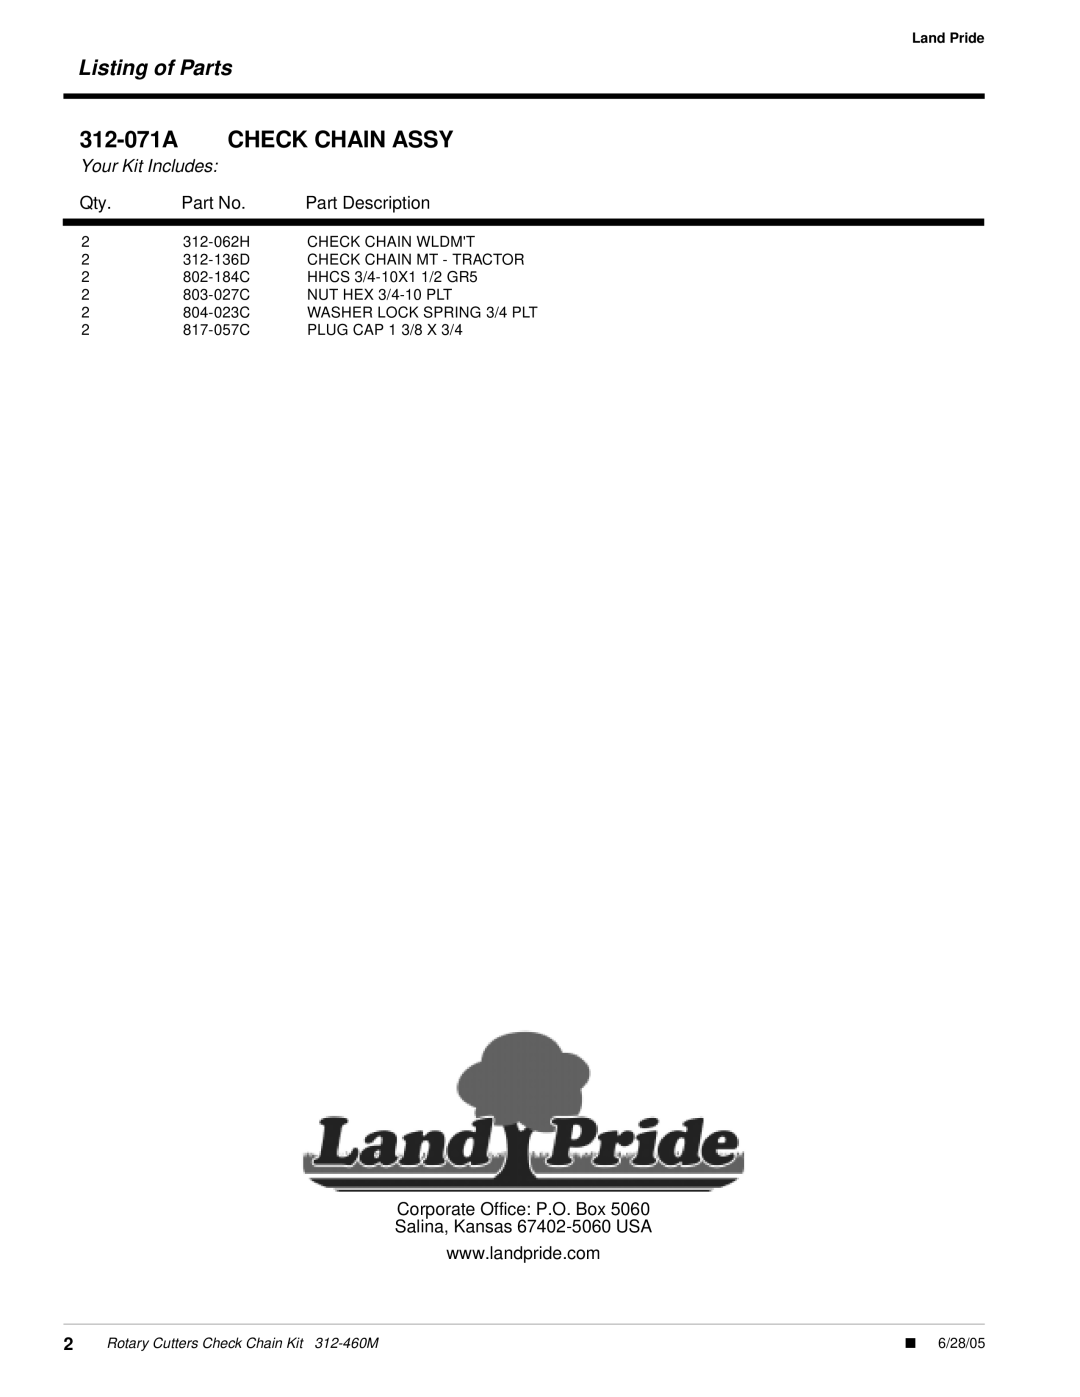 Land Pride RC25 Listing of Parts, 312-071ACHECK CHAIN ASSY, Your Kit Includes, Part Description, Corporate Office P.O. Box 